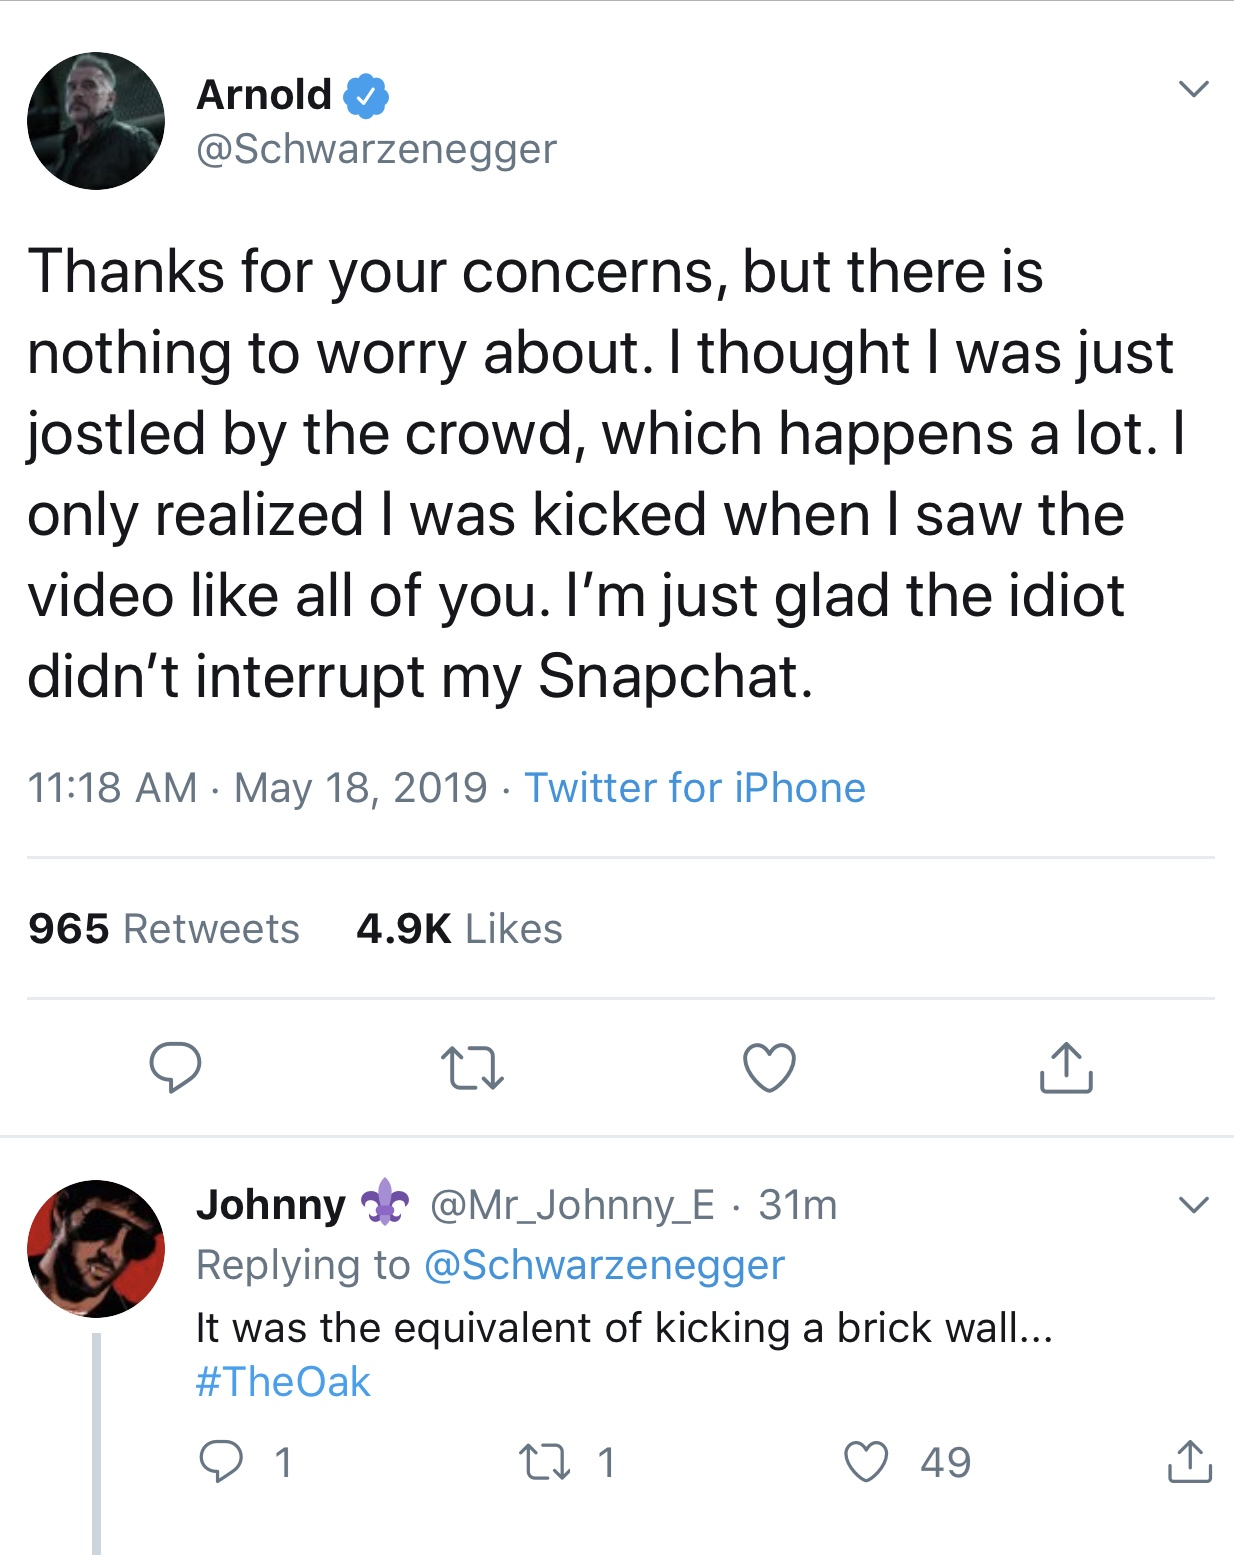 random pics - screenshot - Arnold Thanks for your concerns, but there is nothing to worry about. I thought I was just jostled by the crowd, which happens a lot. I only realized I was kicked when I saw the video all of you. I'm just glad the idiot didn't i